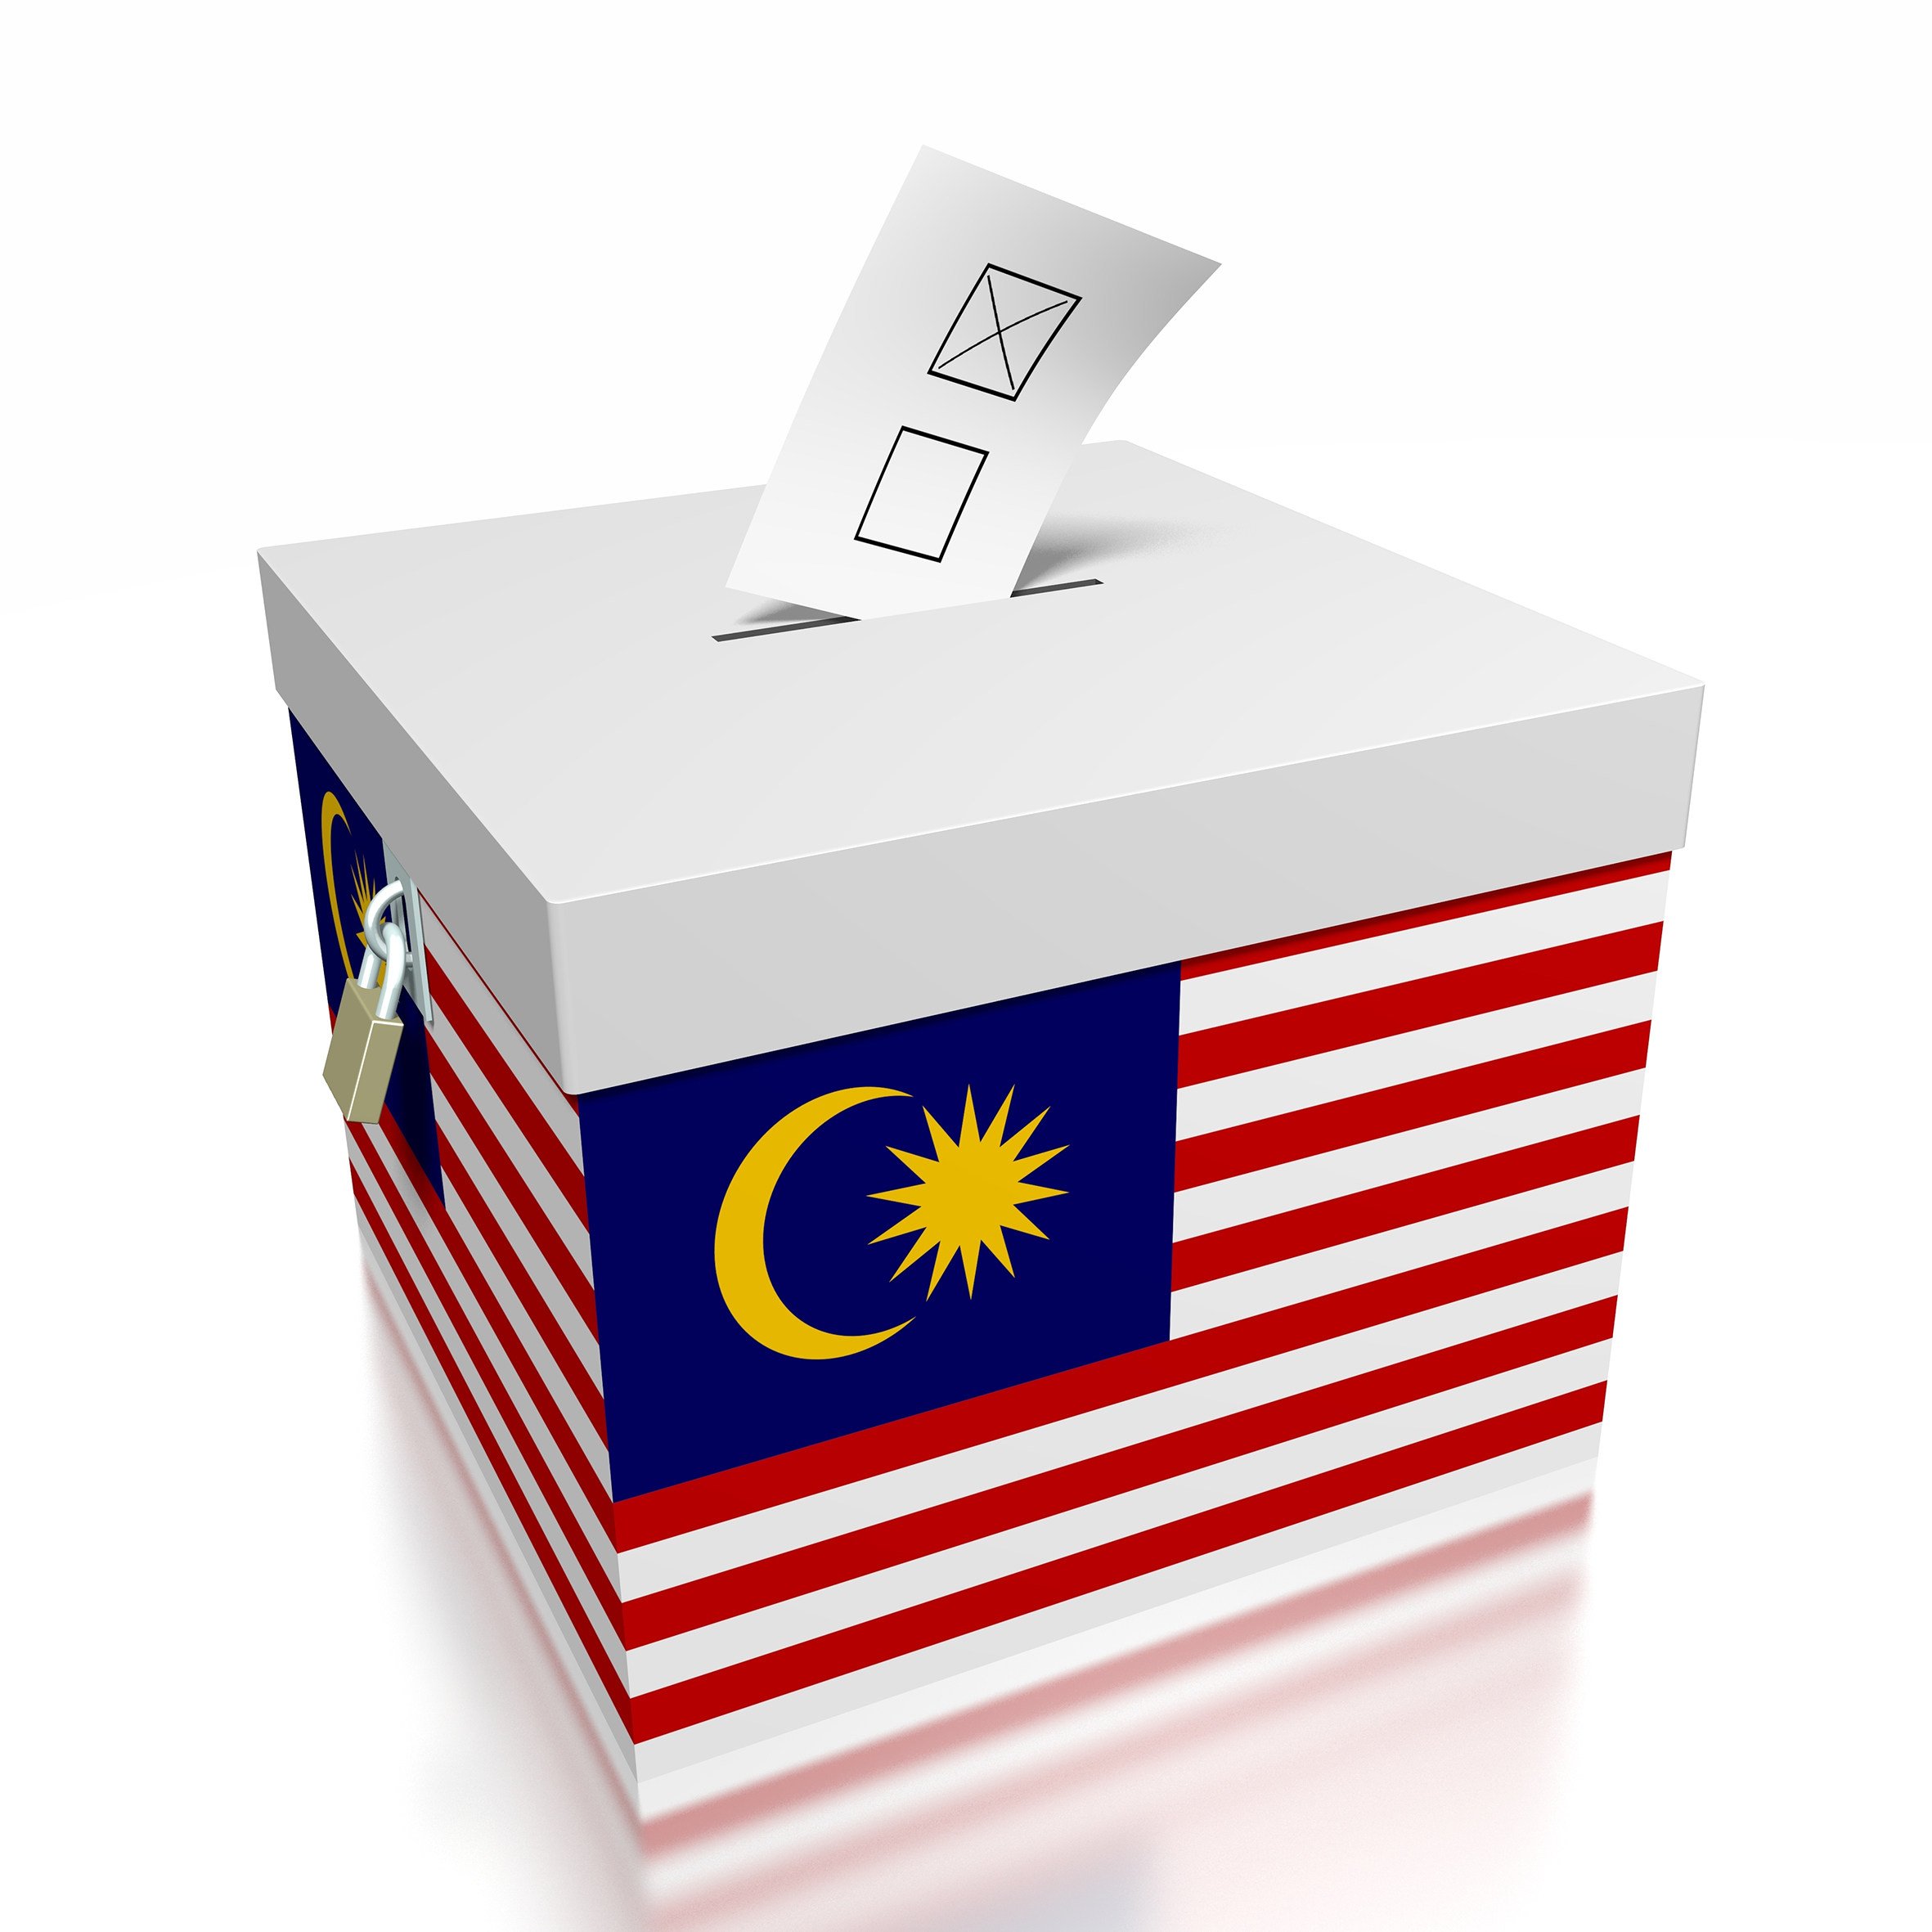 Malaysia faces hung parliament in tight election race. Photo: Shutterstock